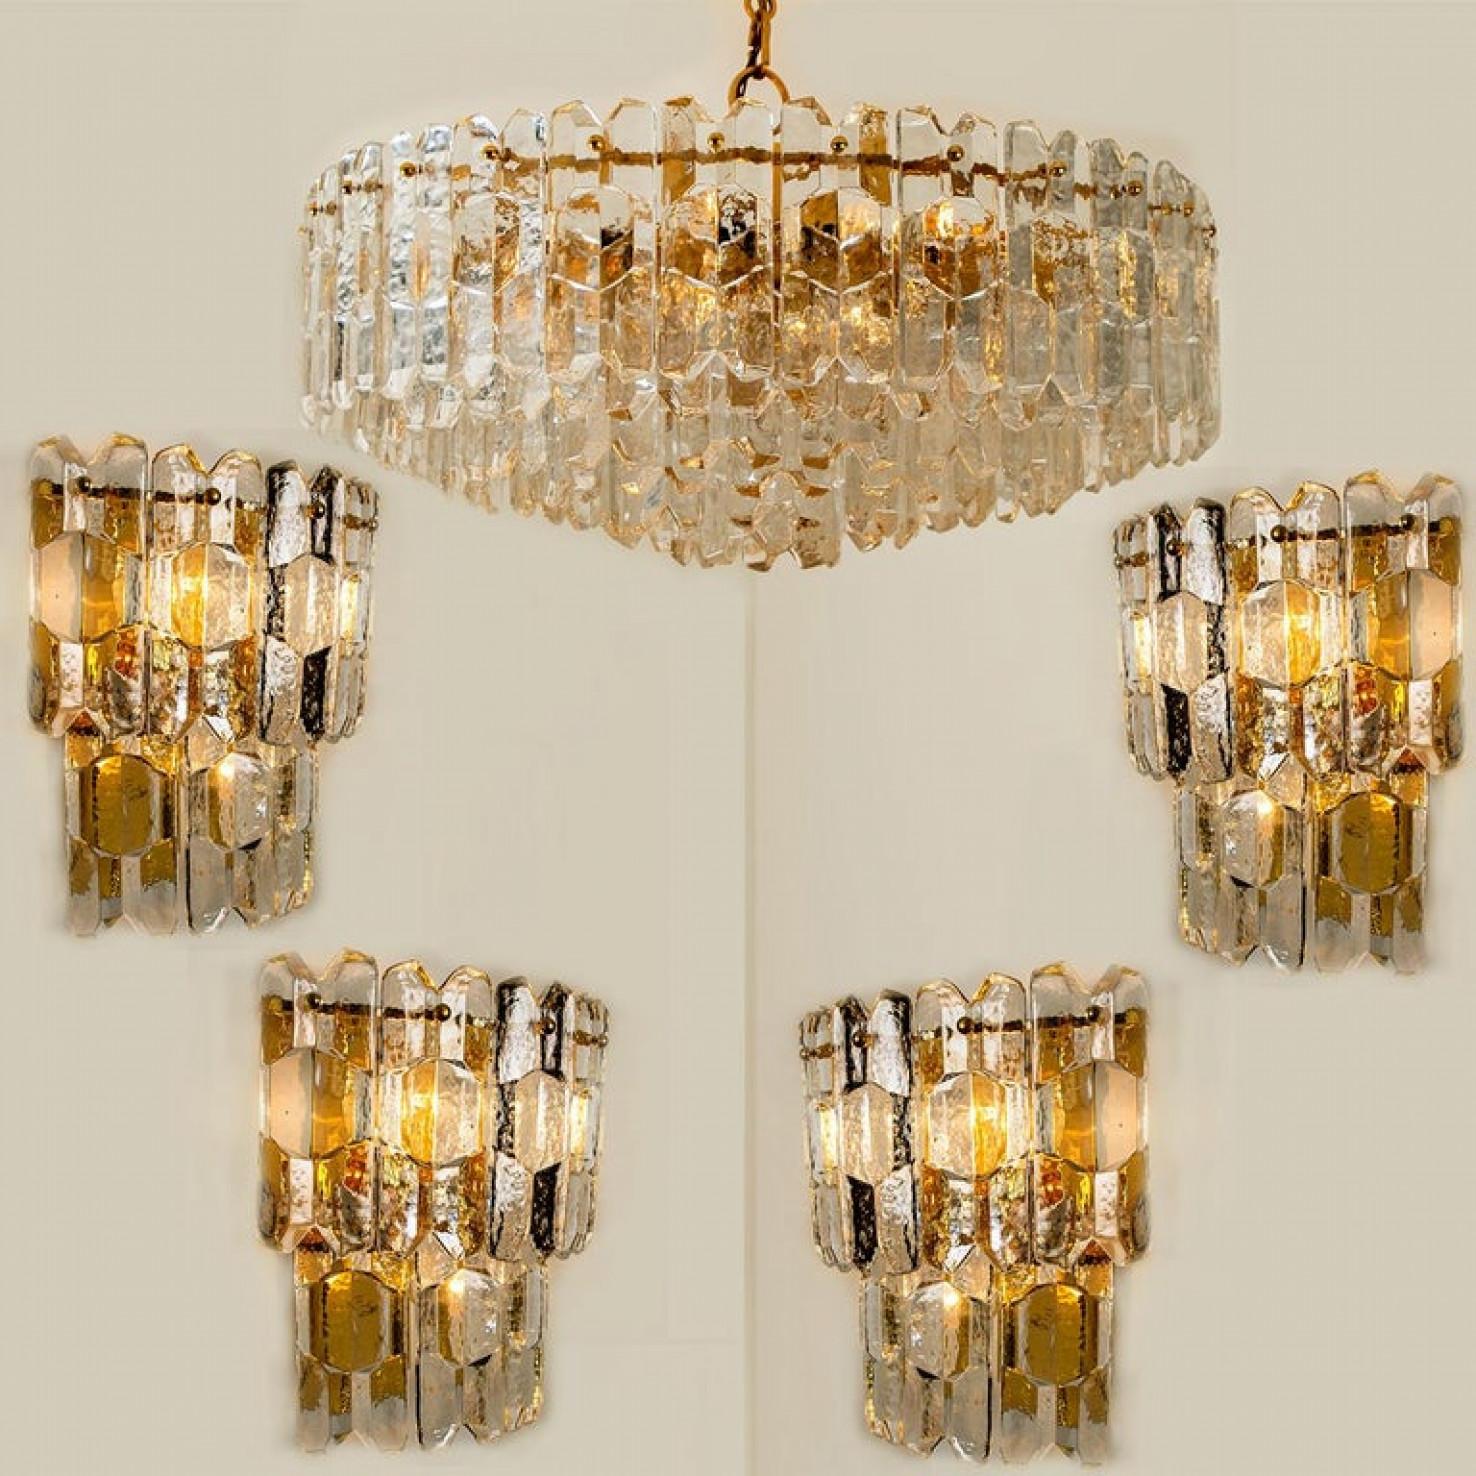 1 of the 2 Huge Kalmar Chandeliers 'Palazzo', Gilded Brass Glass, Austria, 1970s For Sale 2